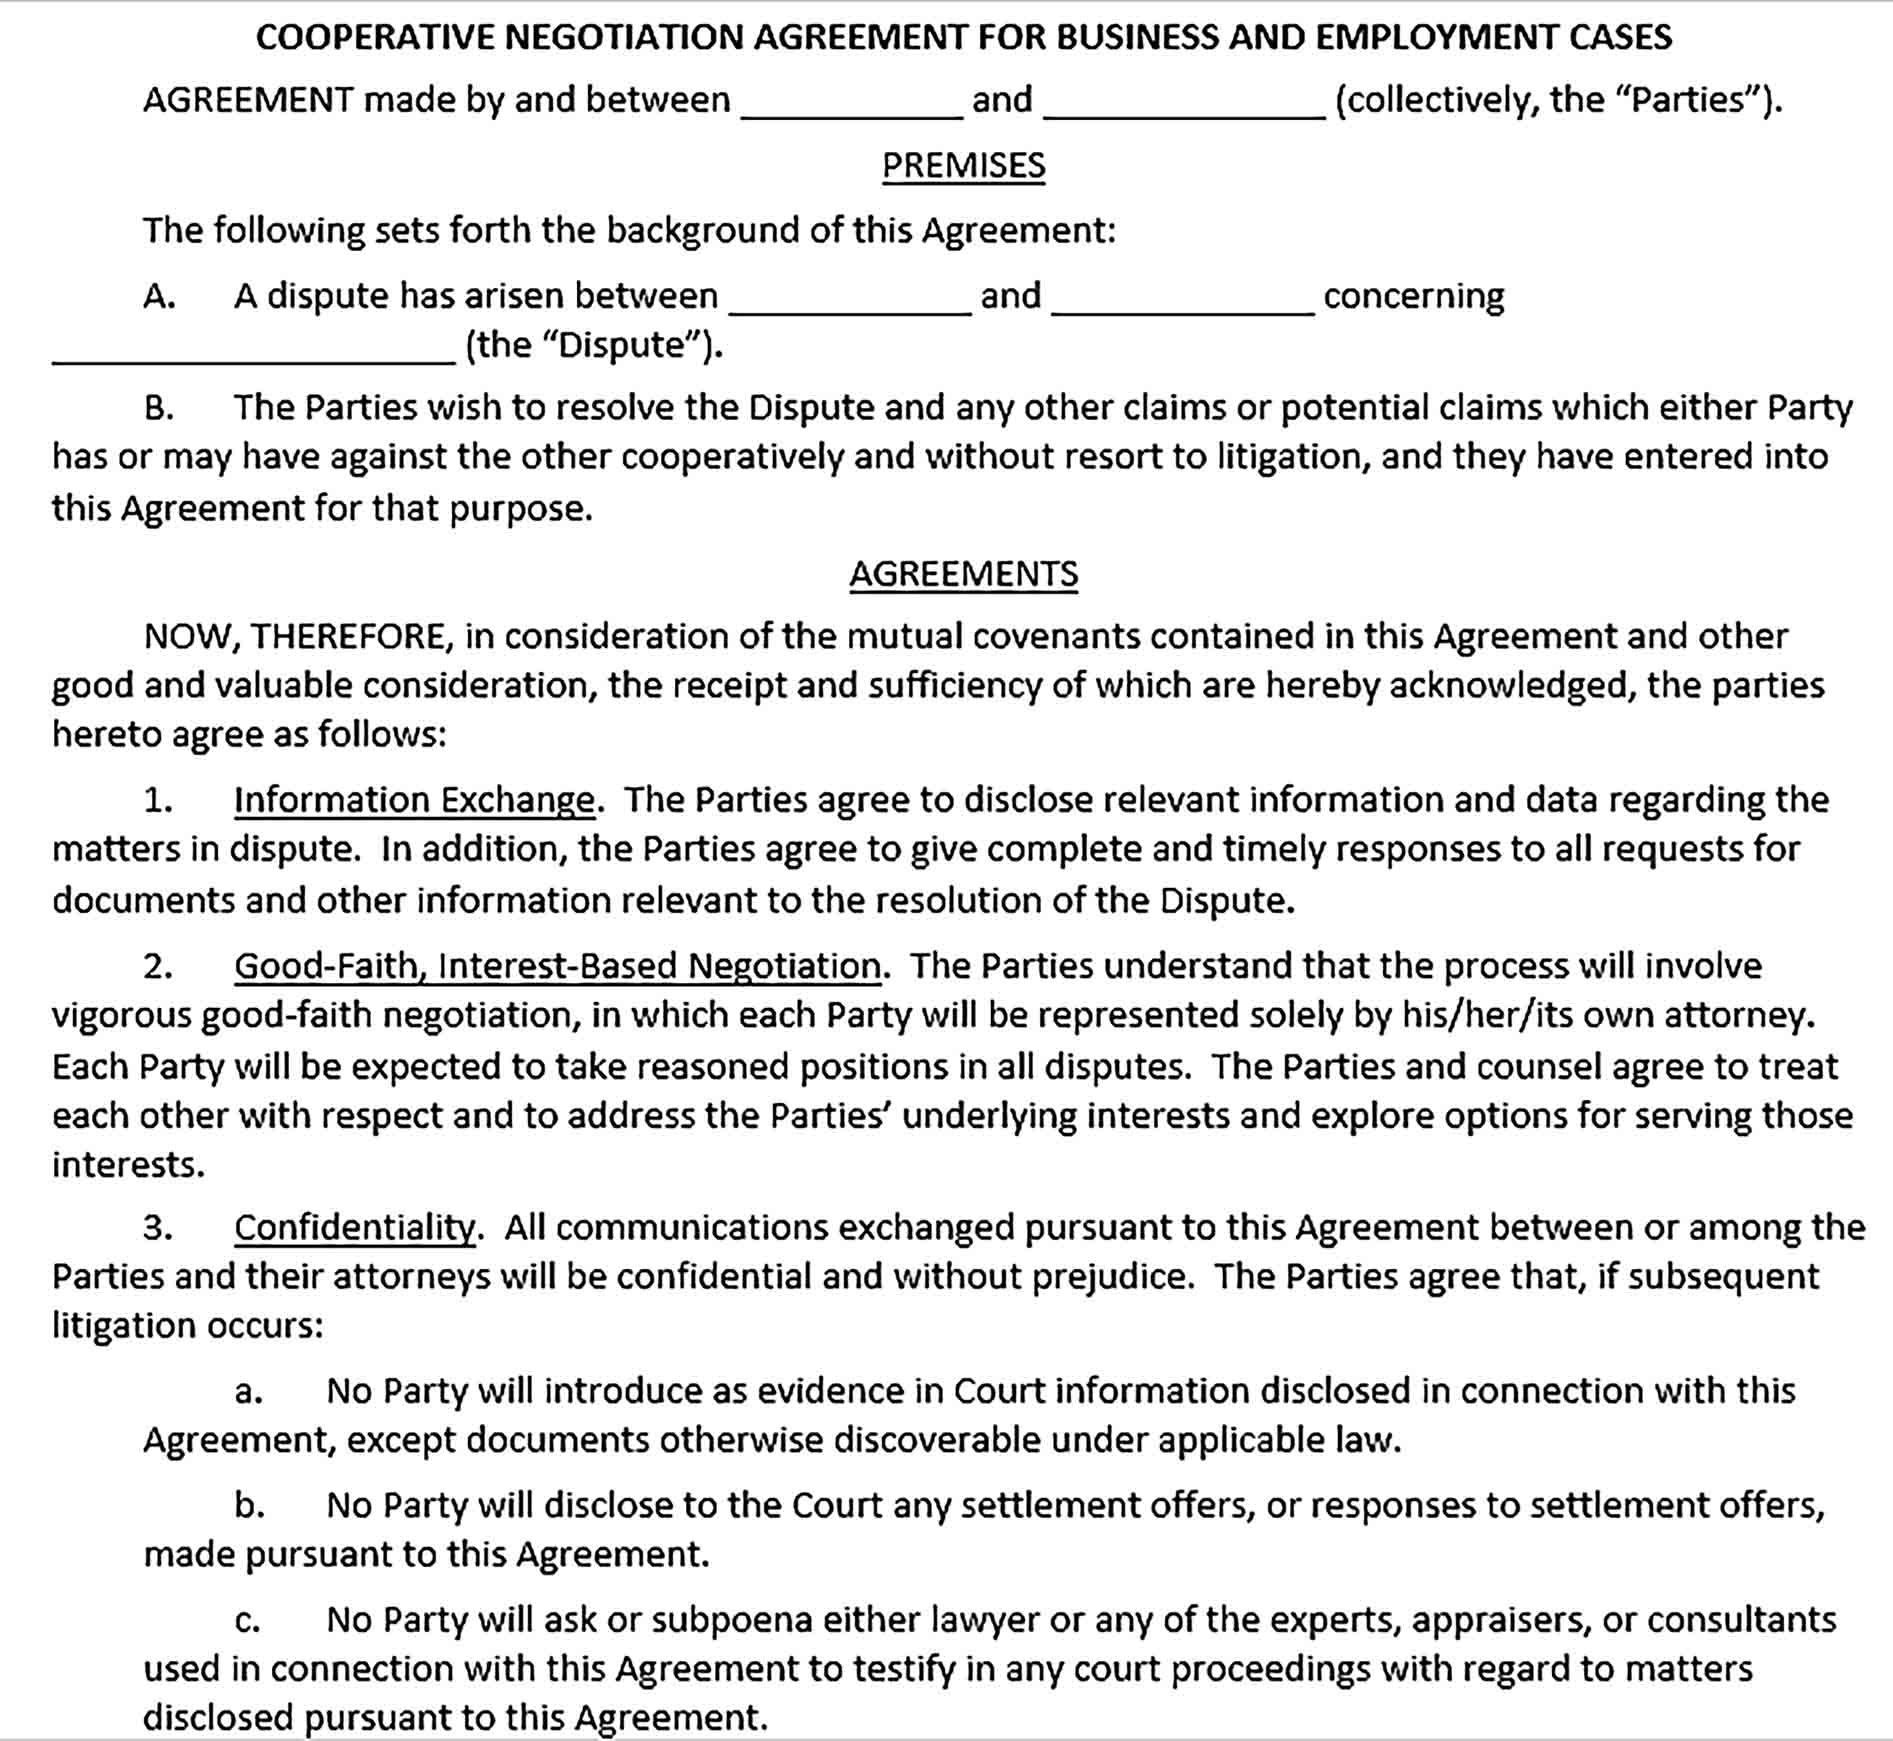 Sample Cooperative Confidentiality Negotiation Agreement